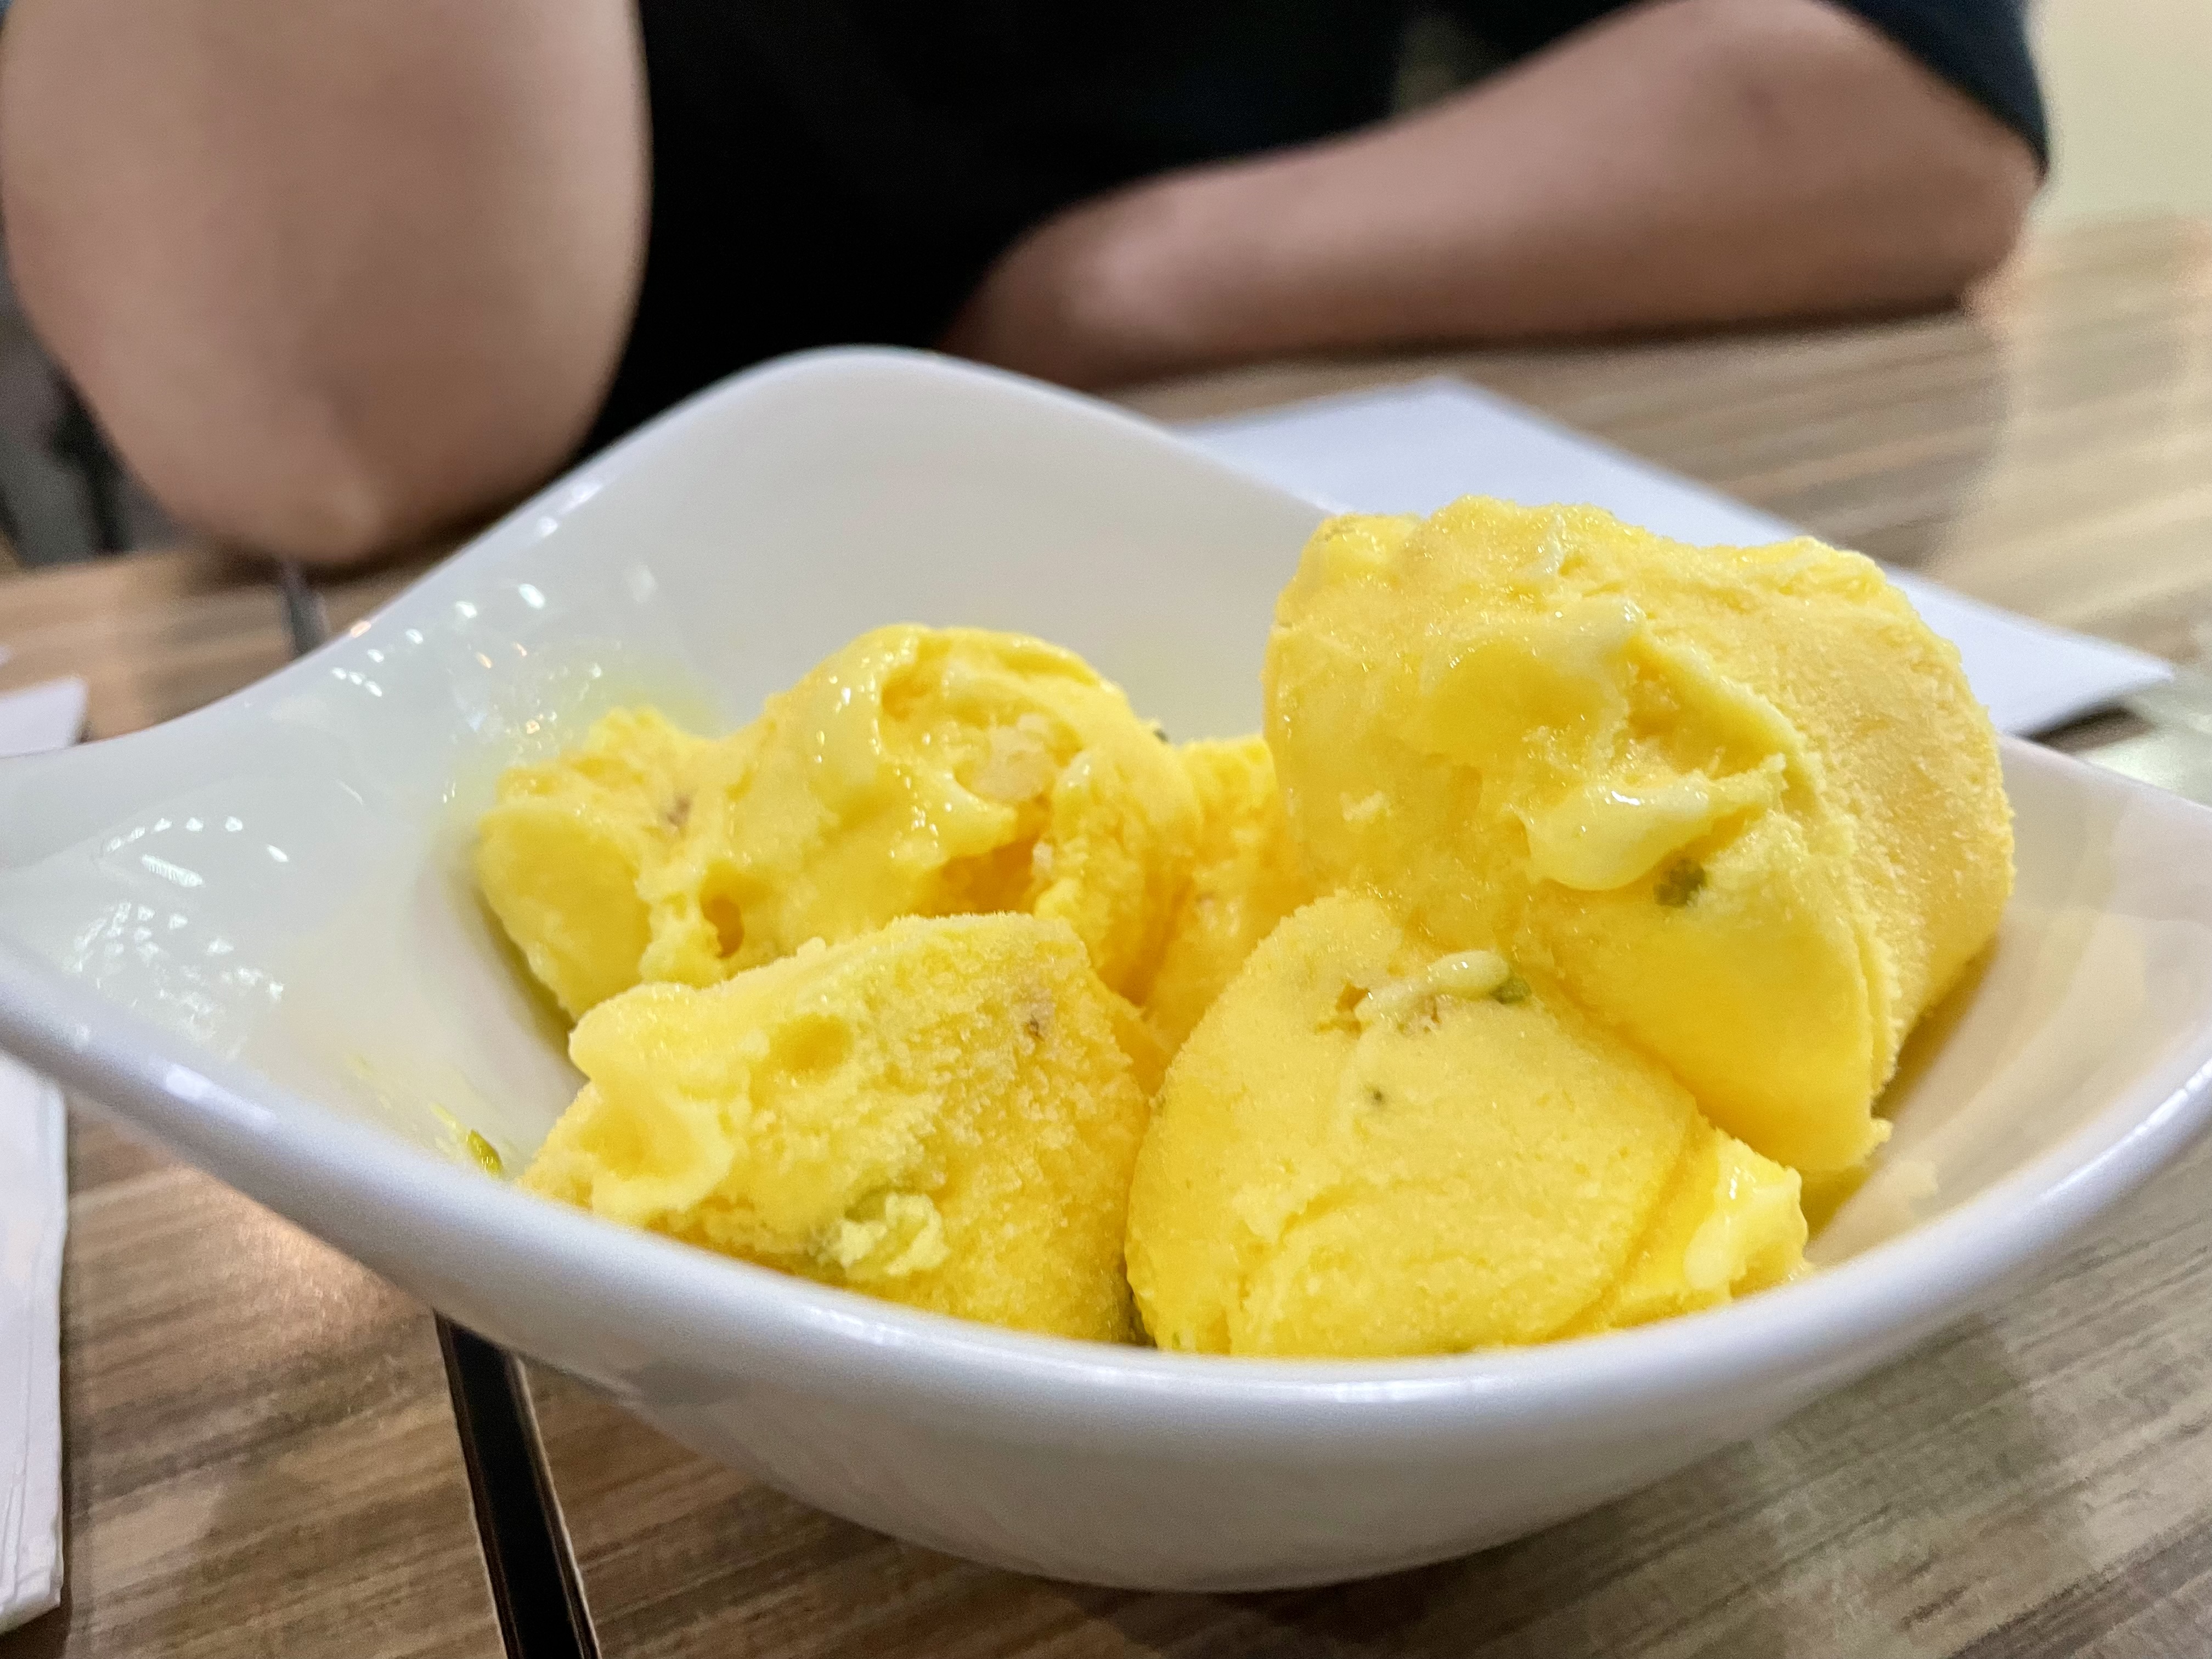 The in-house saffron ice-cream is made with a blend of milk, real cream, saffron and pistachio.